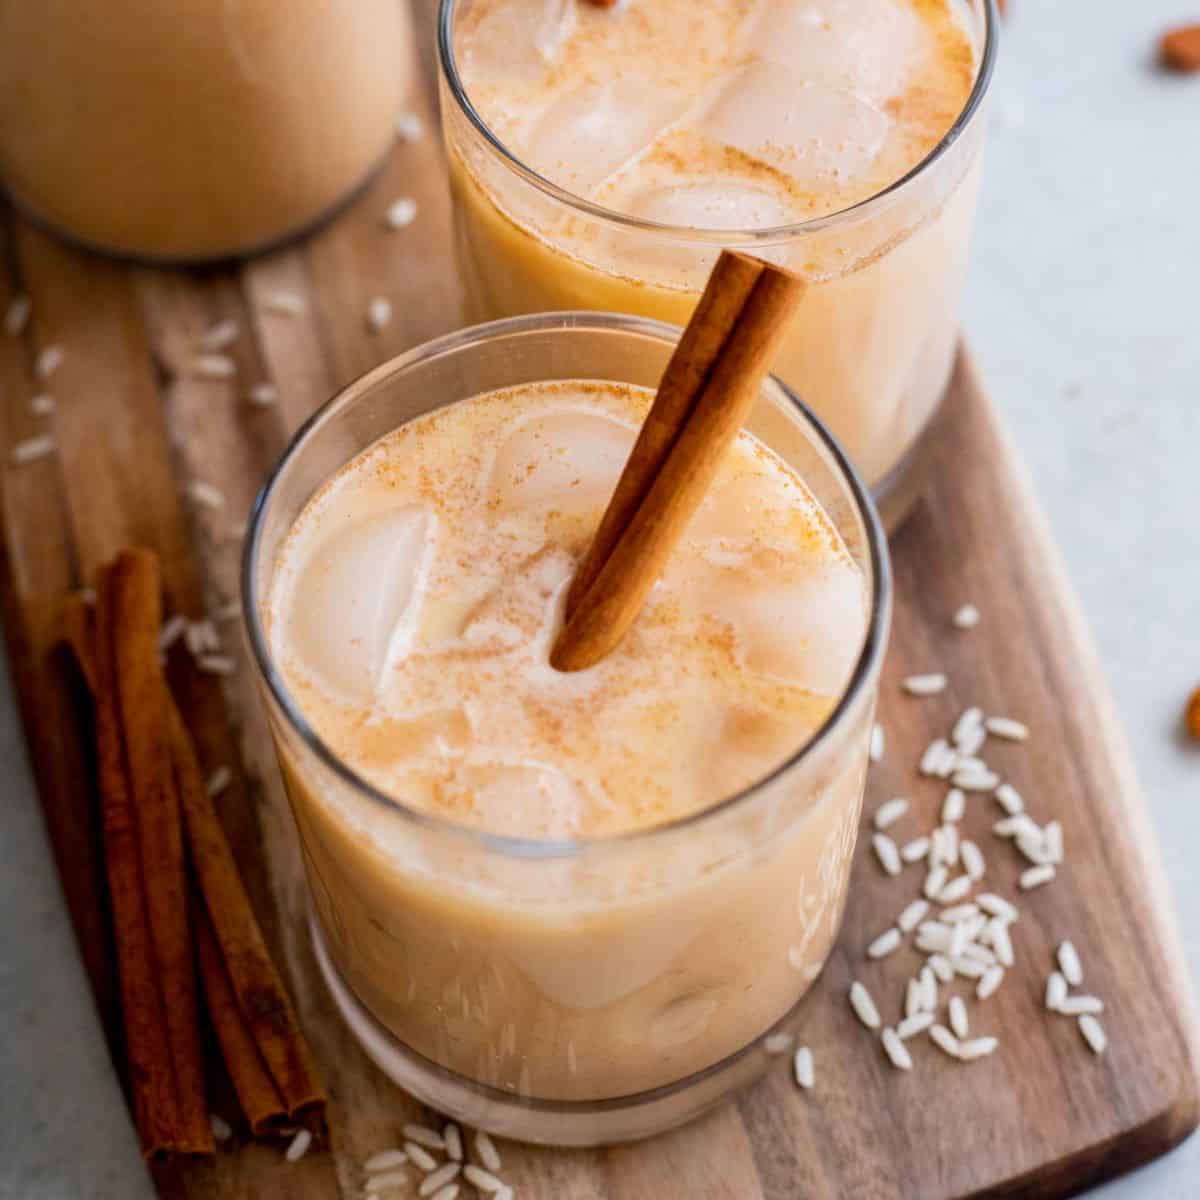 Pumpkin horchata in a glass on a wood surface.